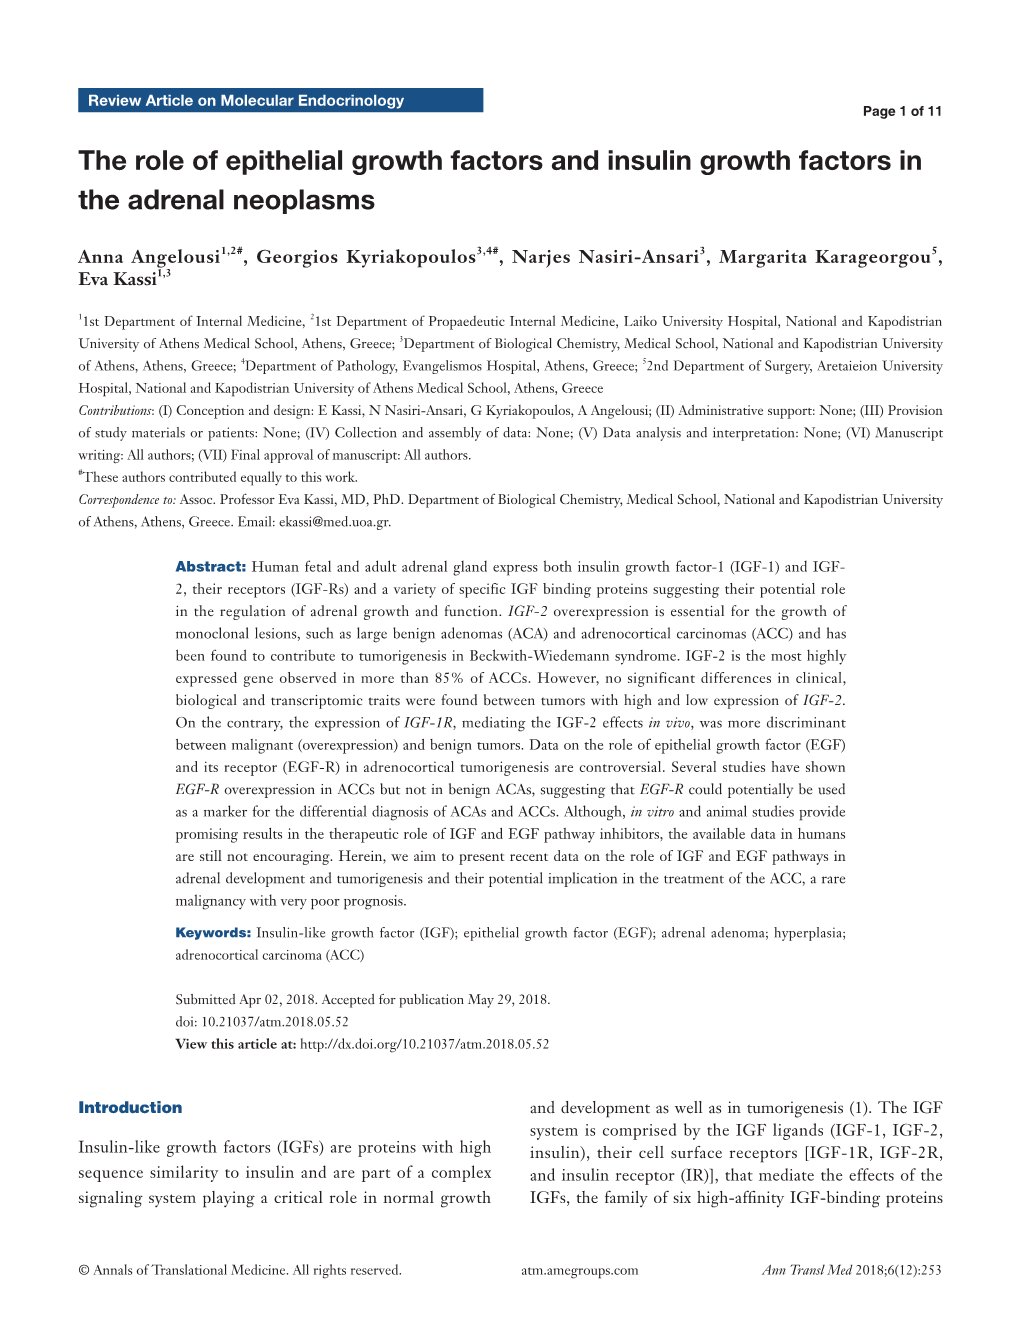 The Role of Epithelial Growth Factors and Insulin Growth Factors in the Adrenal Neoplasms